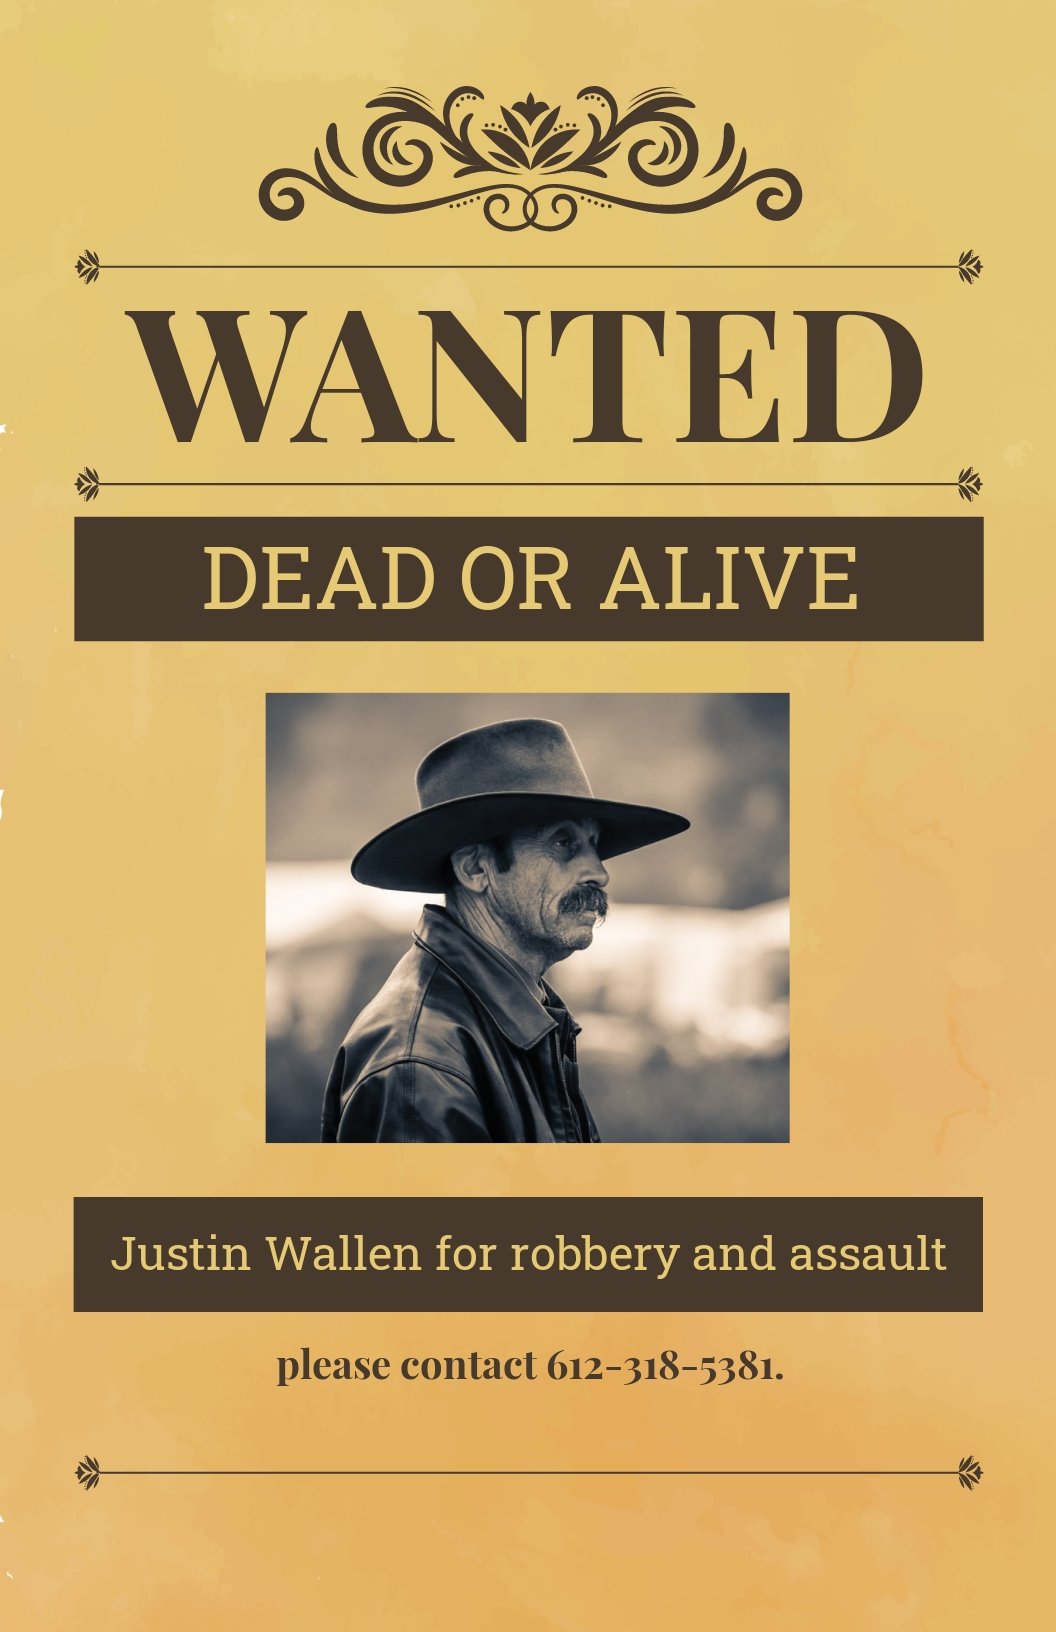 Free Black Wanted Poster Template.jpe